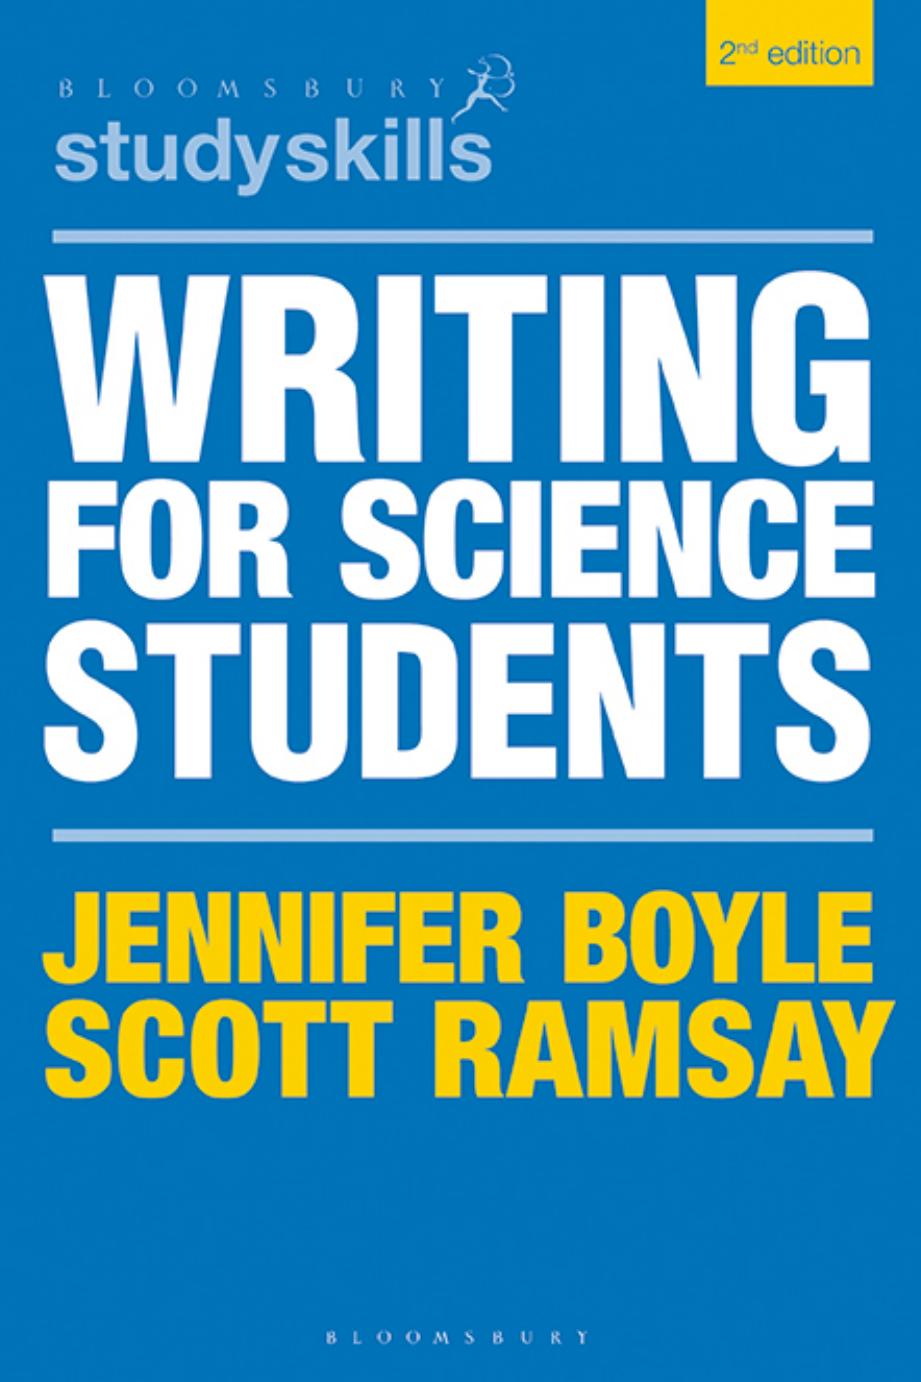 Writing for Science Students by Jennifer Boyle Scott Ramsay